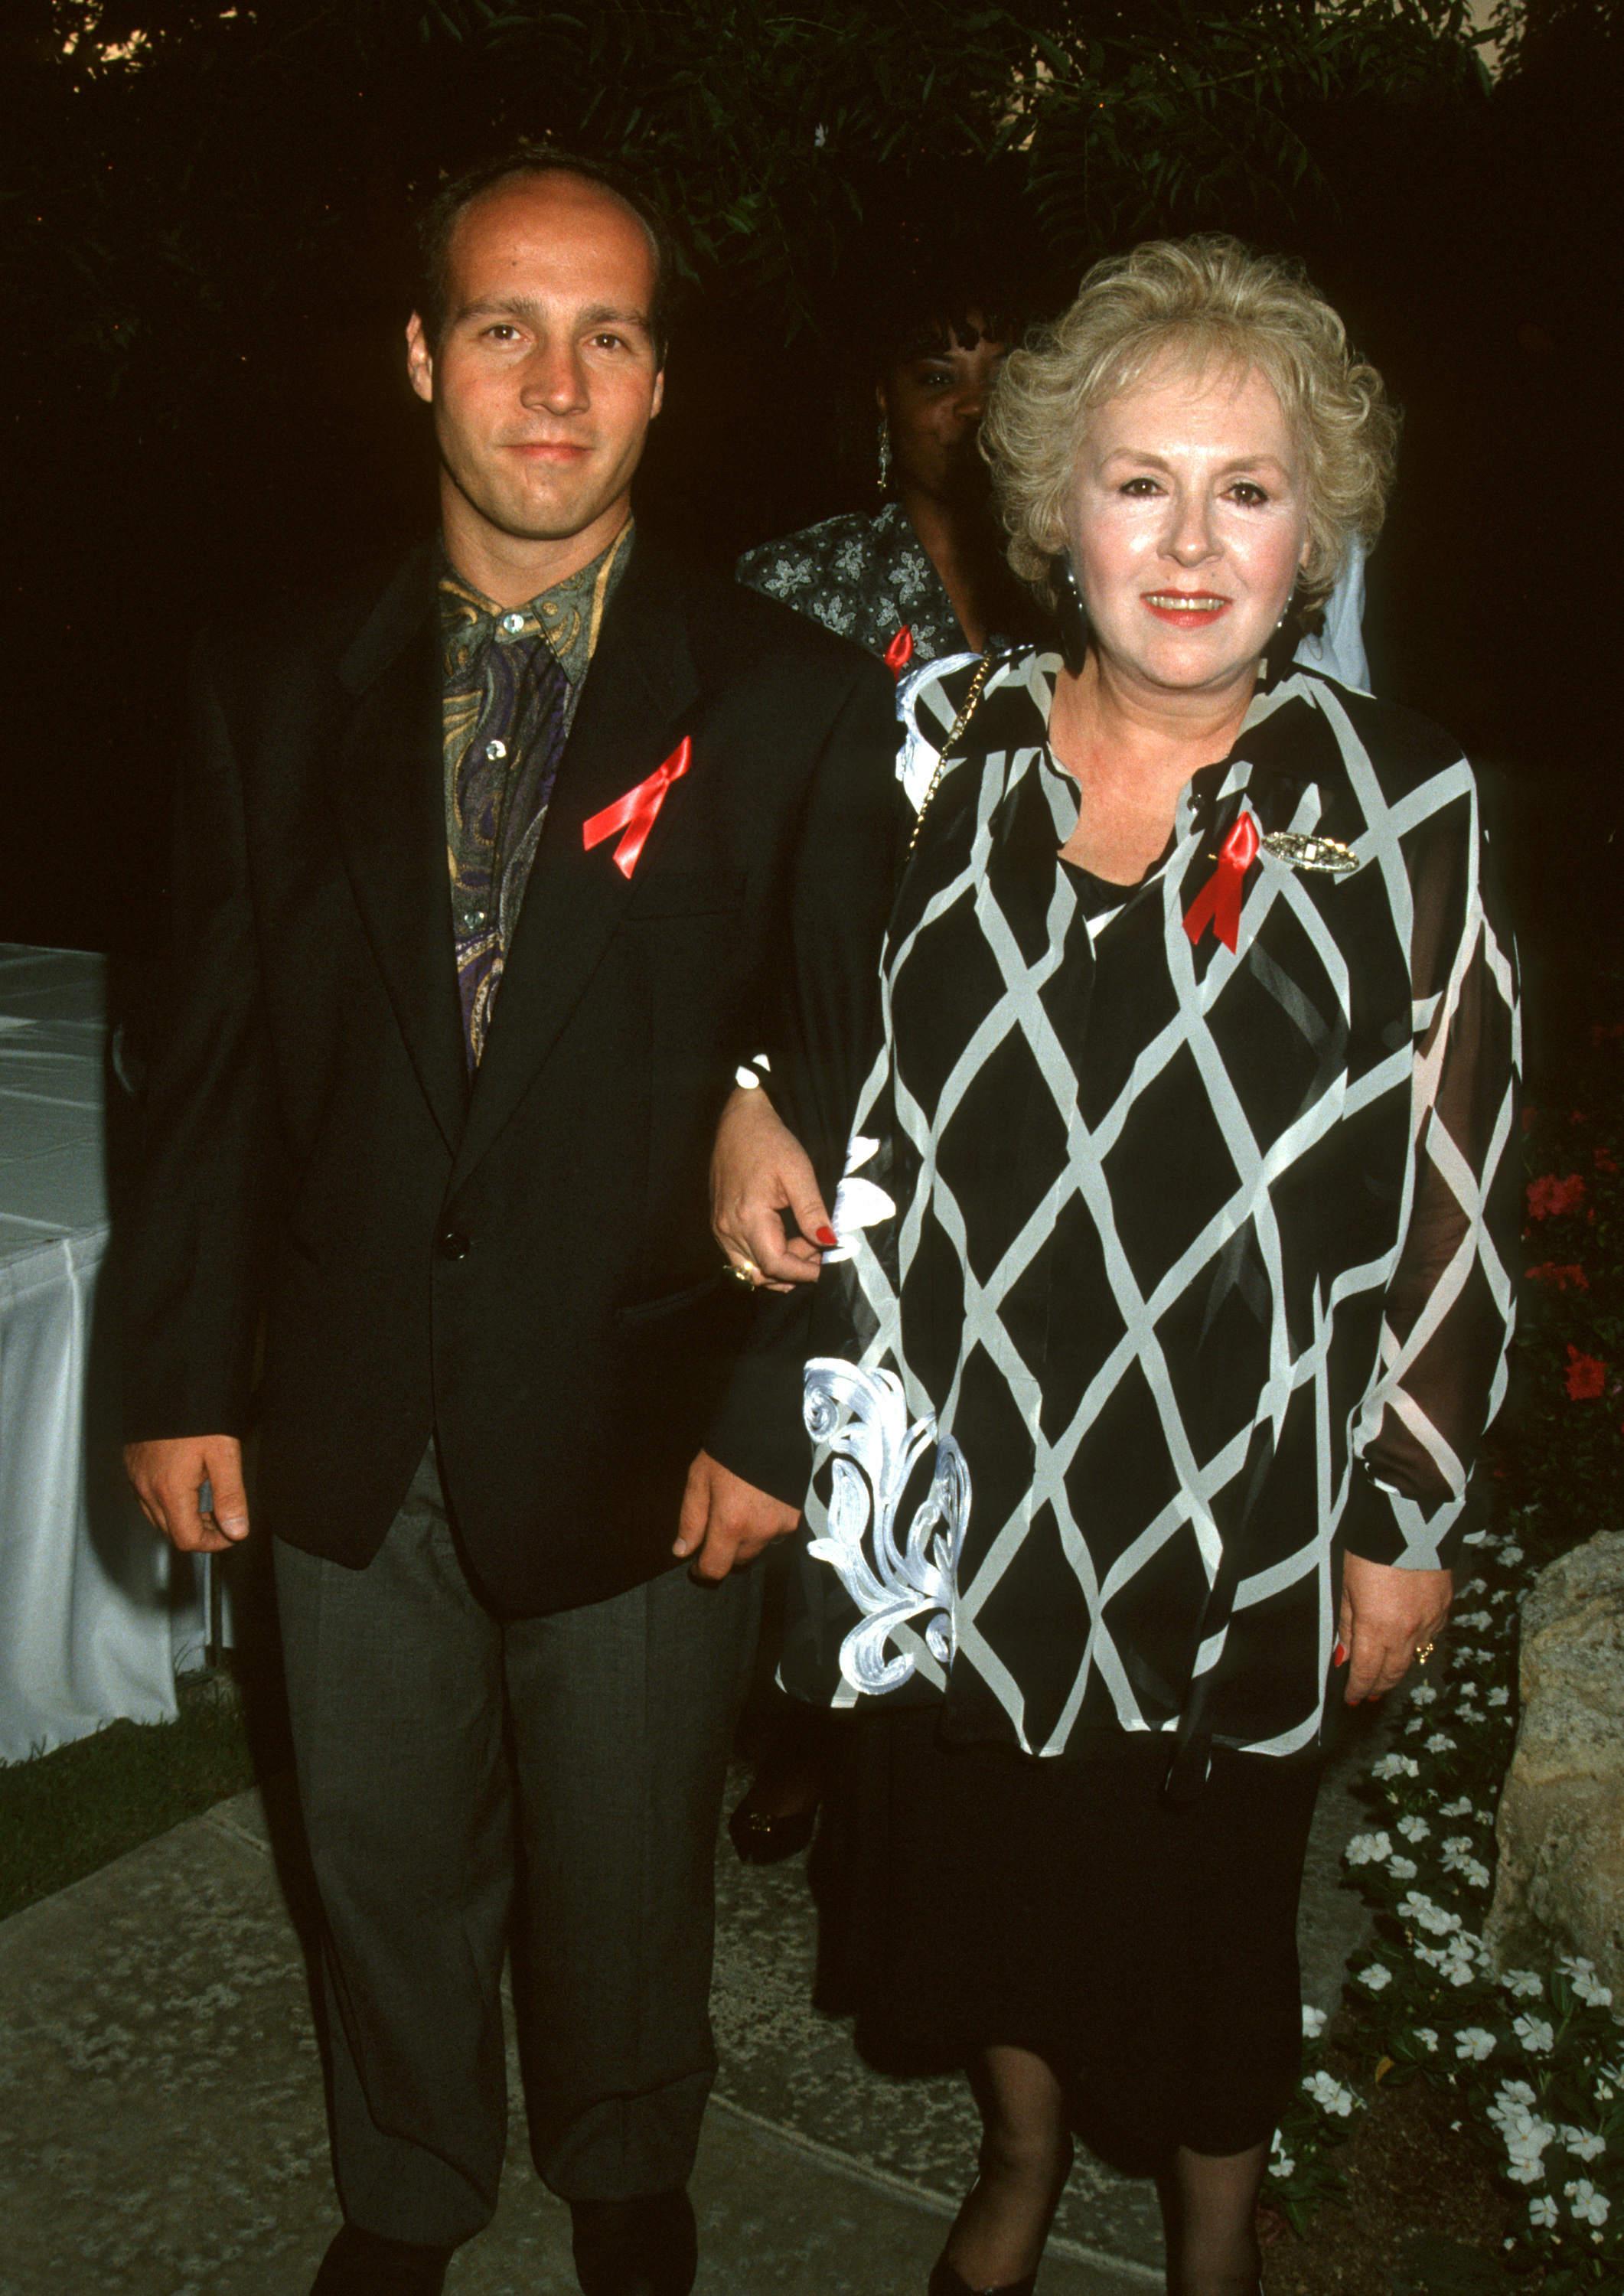 Michael Cannata and Doris Roberts during the Primetime Emmy Awards Nominees Pre-Party in Westwood, California, on August 25, 1992 | Source: Getty Images